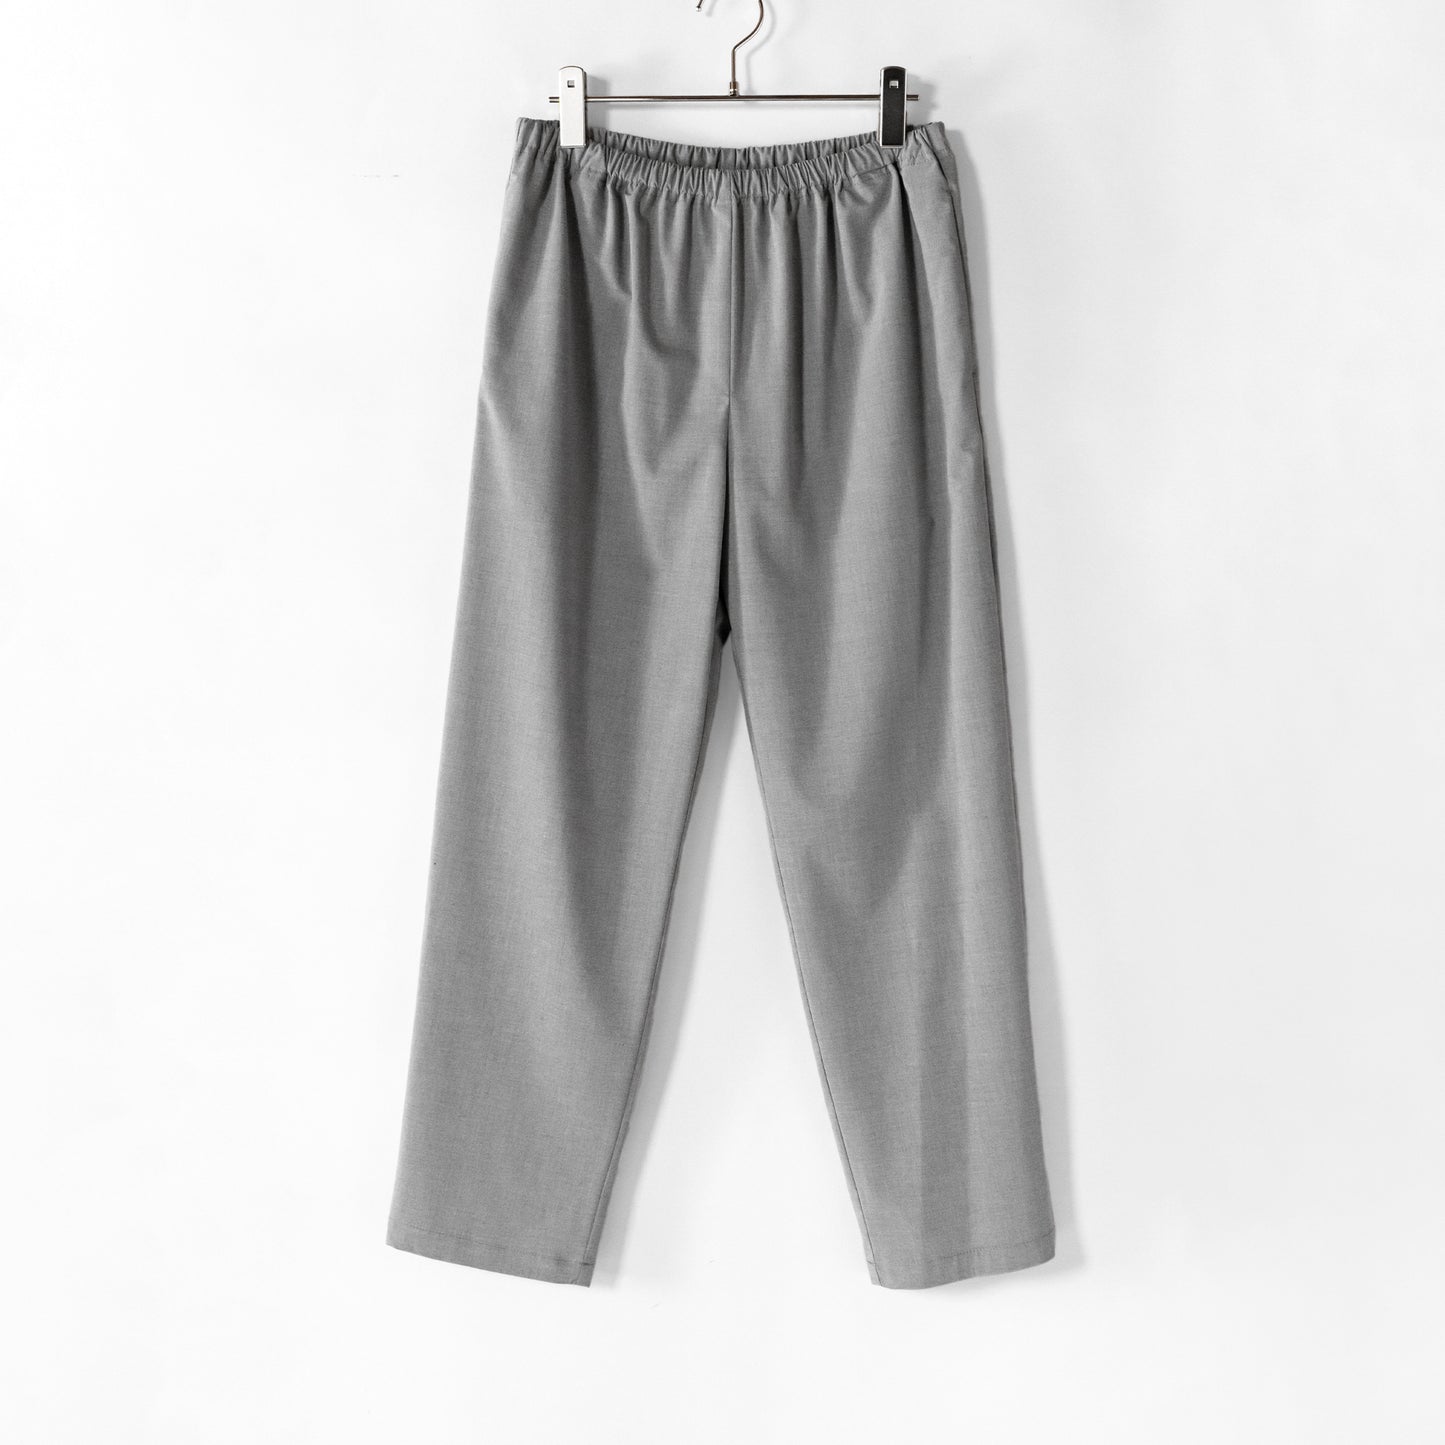 STAMP AND DIARY PEG PANTS